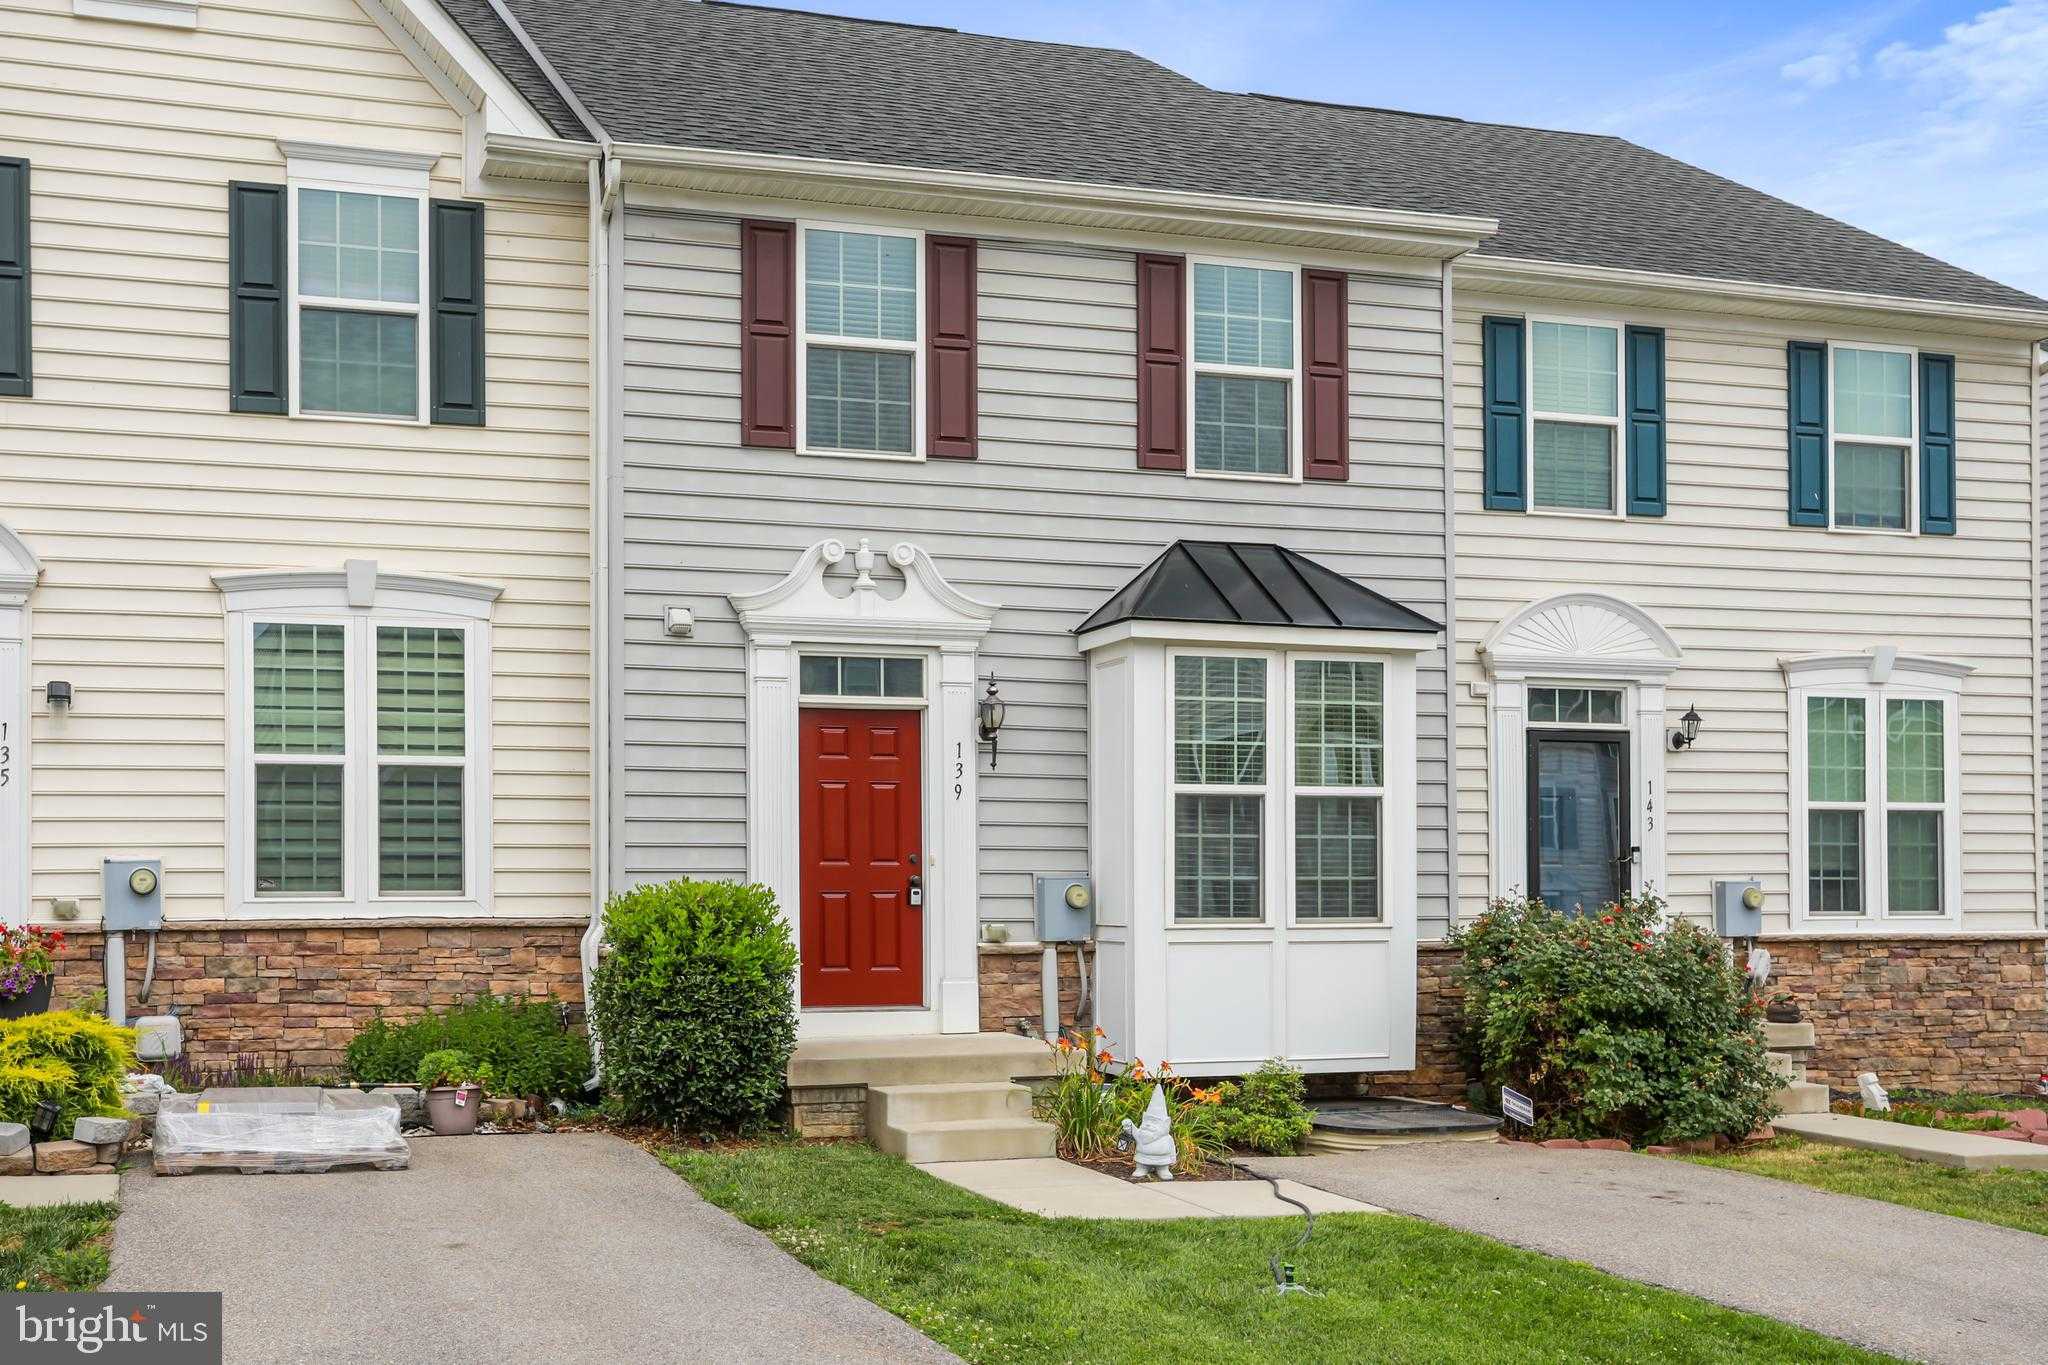 View FALLING WATERS, WV 25419 townhome